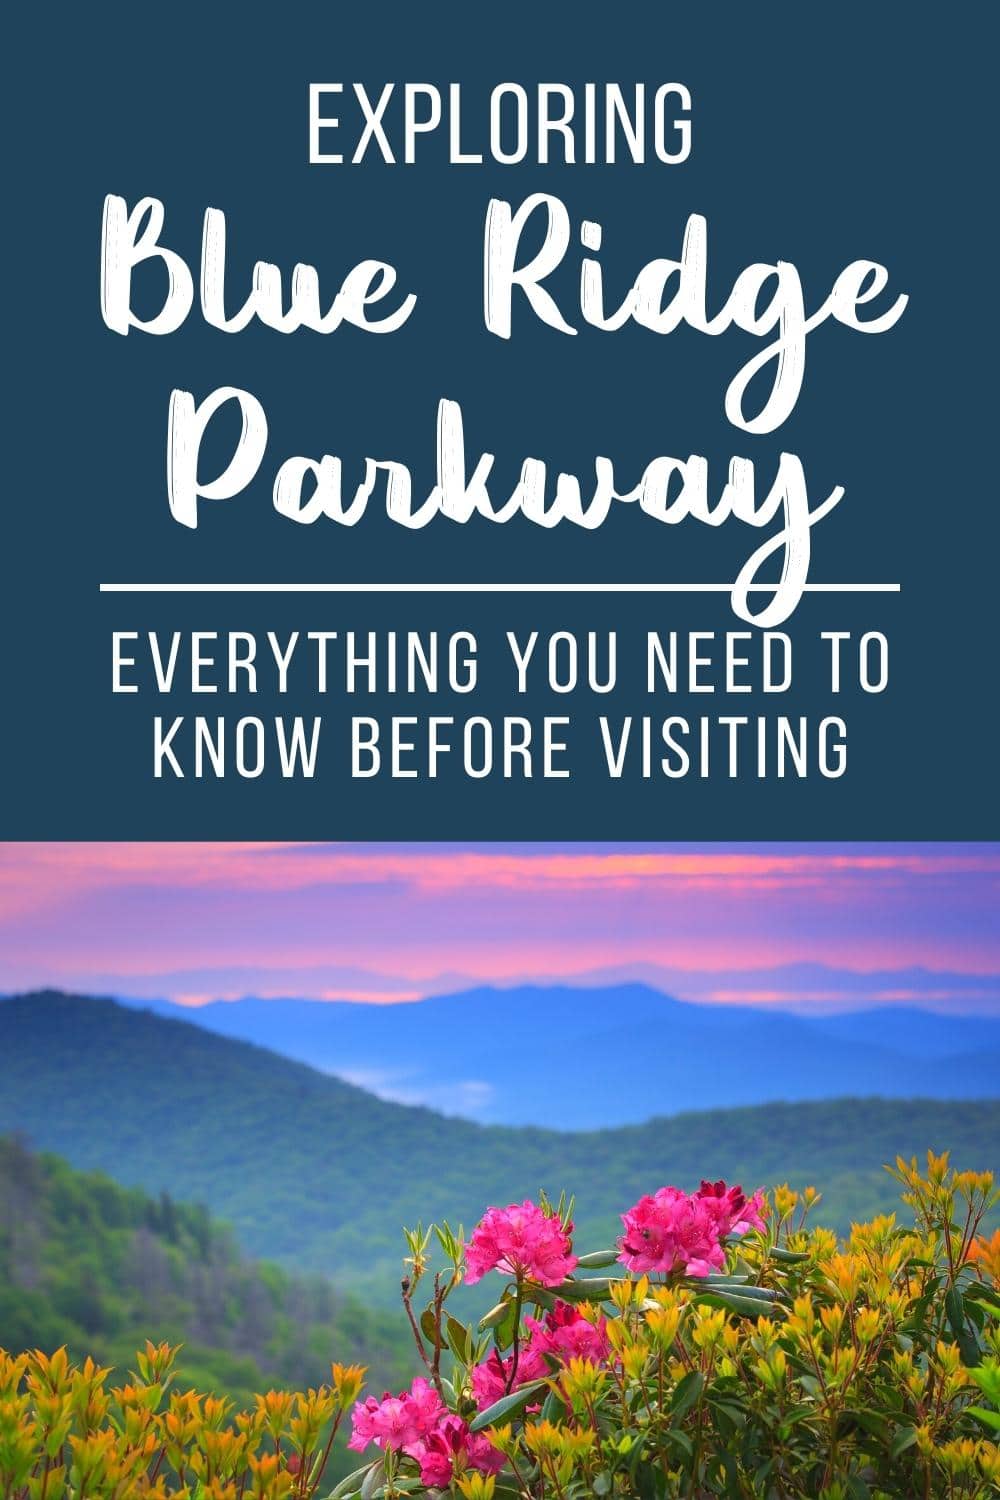 Driving Blue Ridge Parkway: Useful Tips & What to Expect